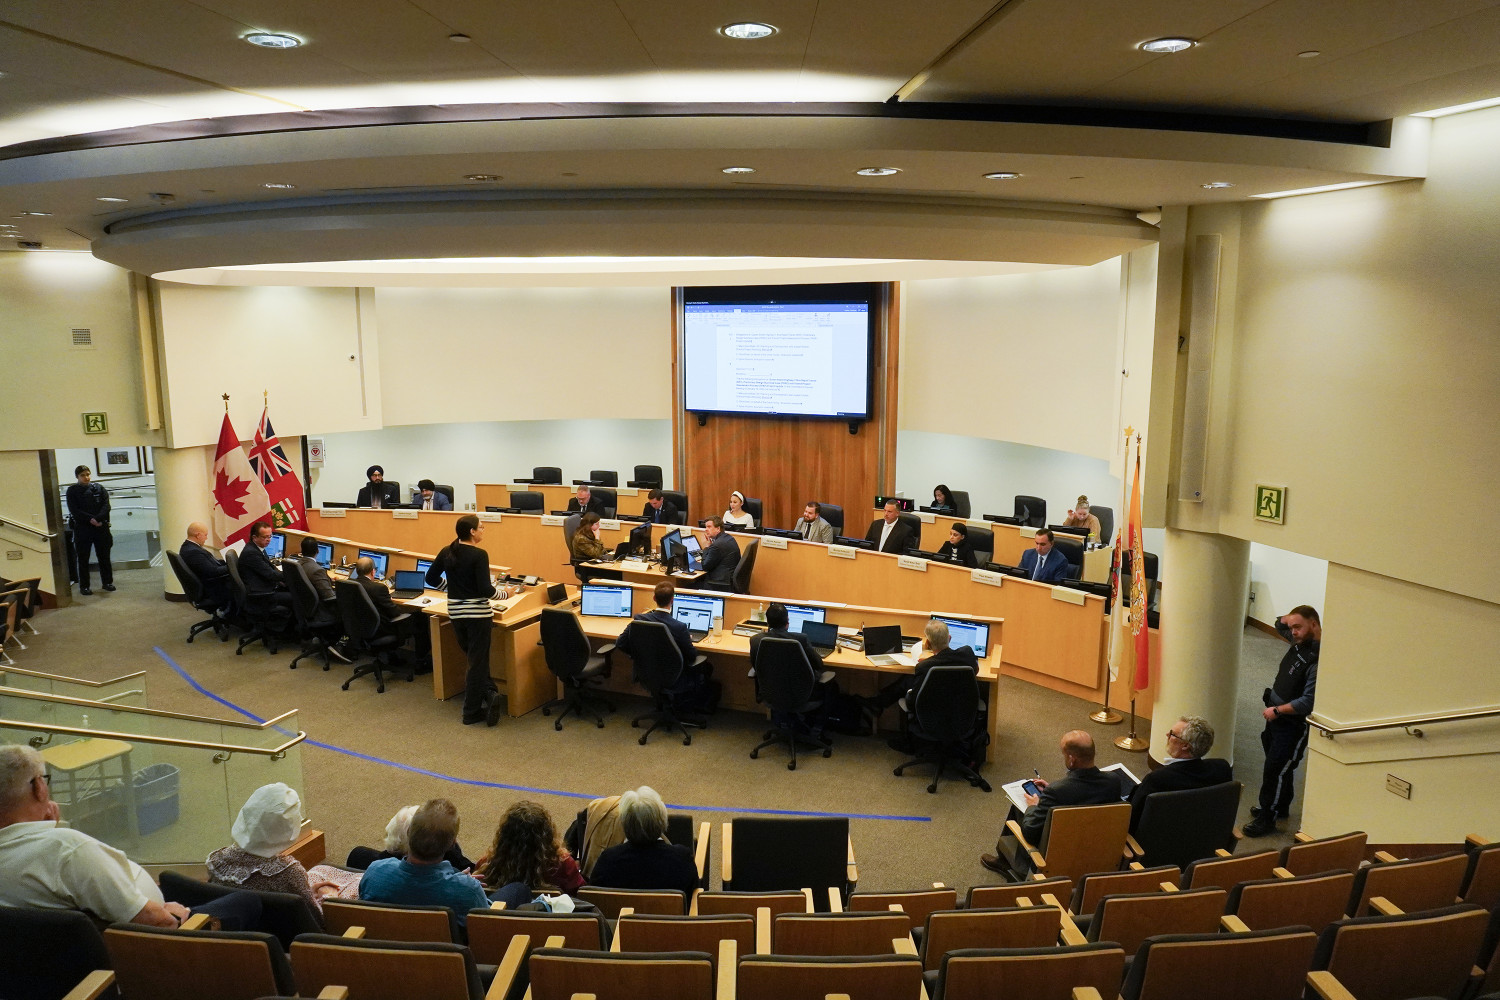 Brampton forming Women’s Advisory Committee to provide Council with input on key issues